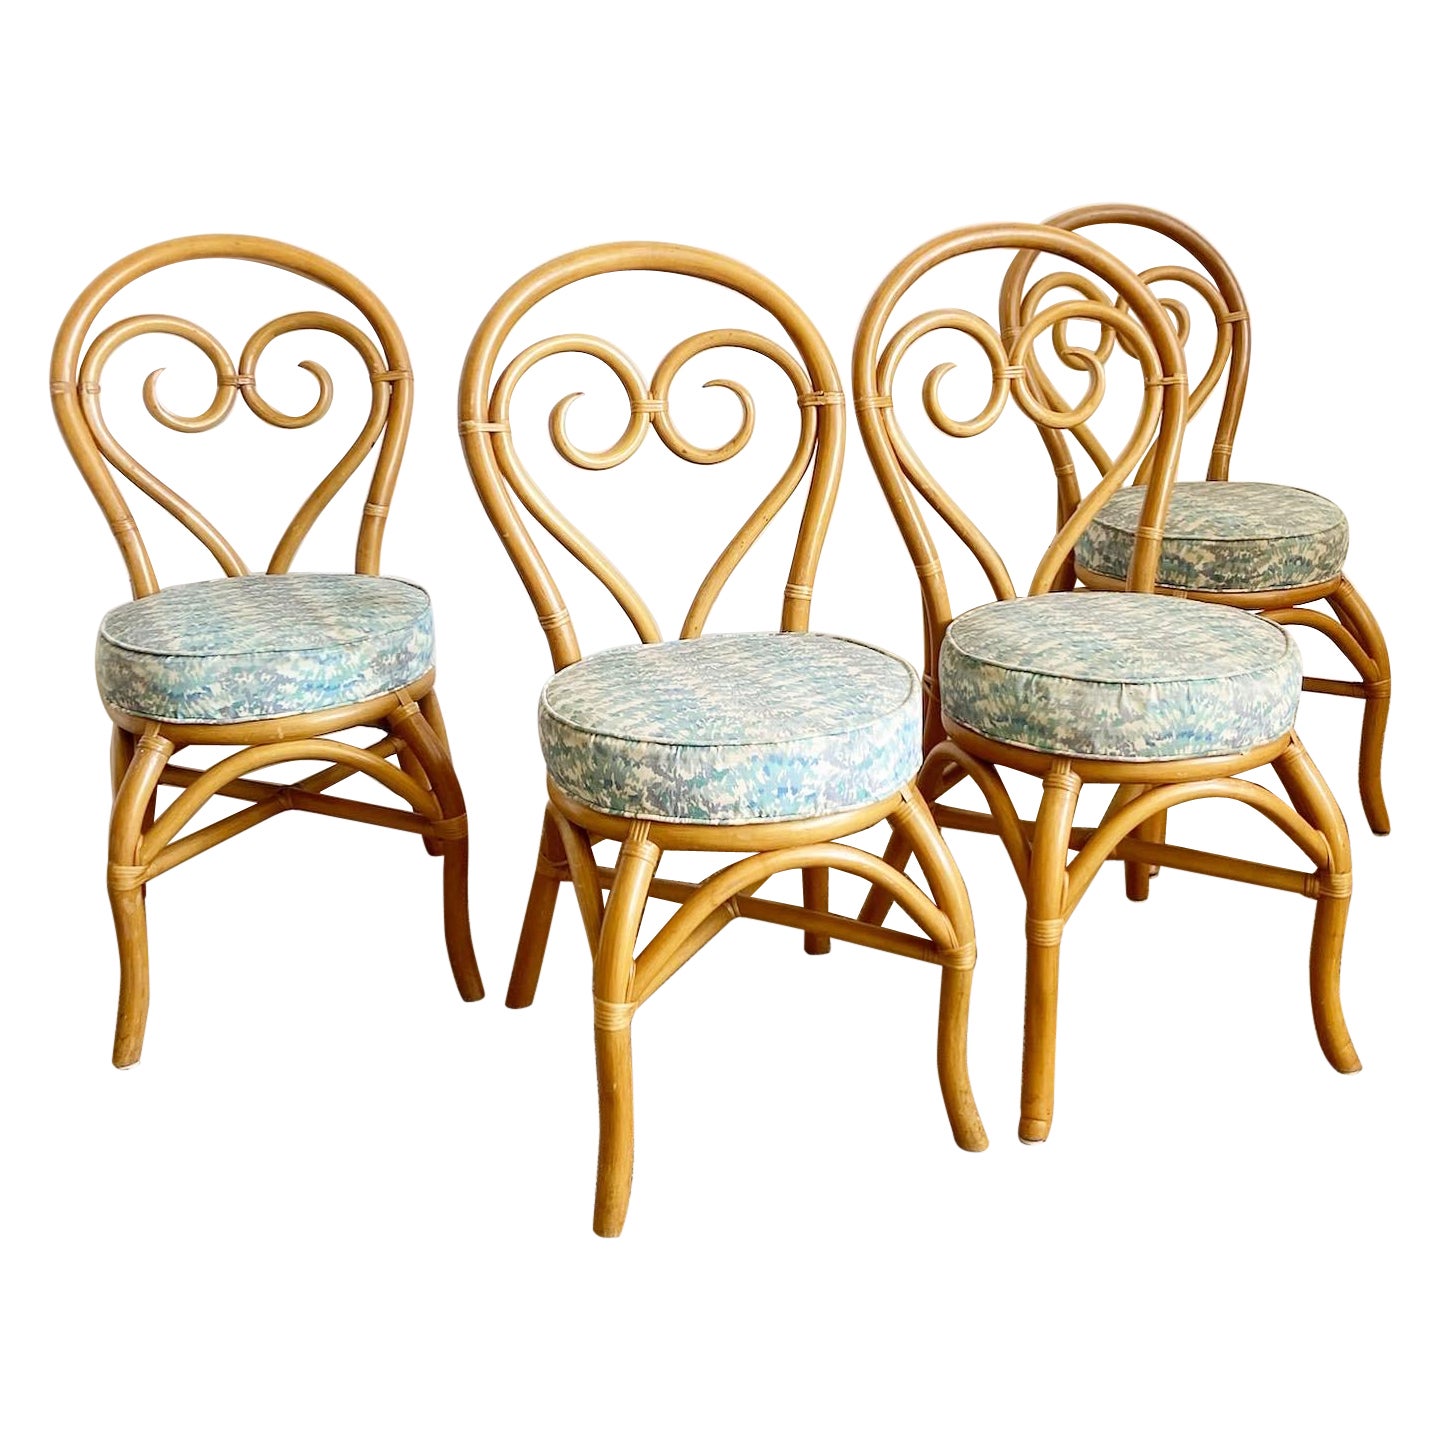 Boho Chic Bent Bamboo Rattan Heart Back Dining Chairs - Set of 4